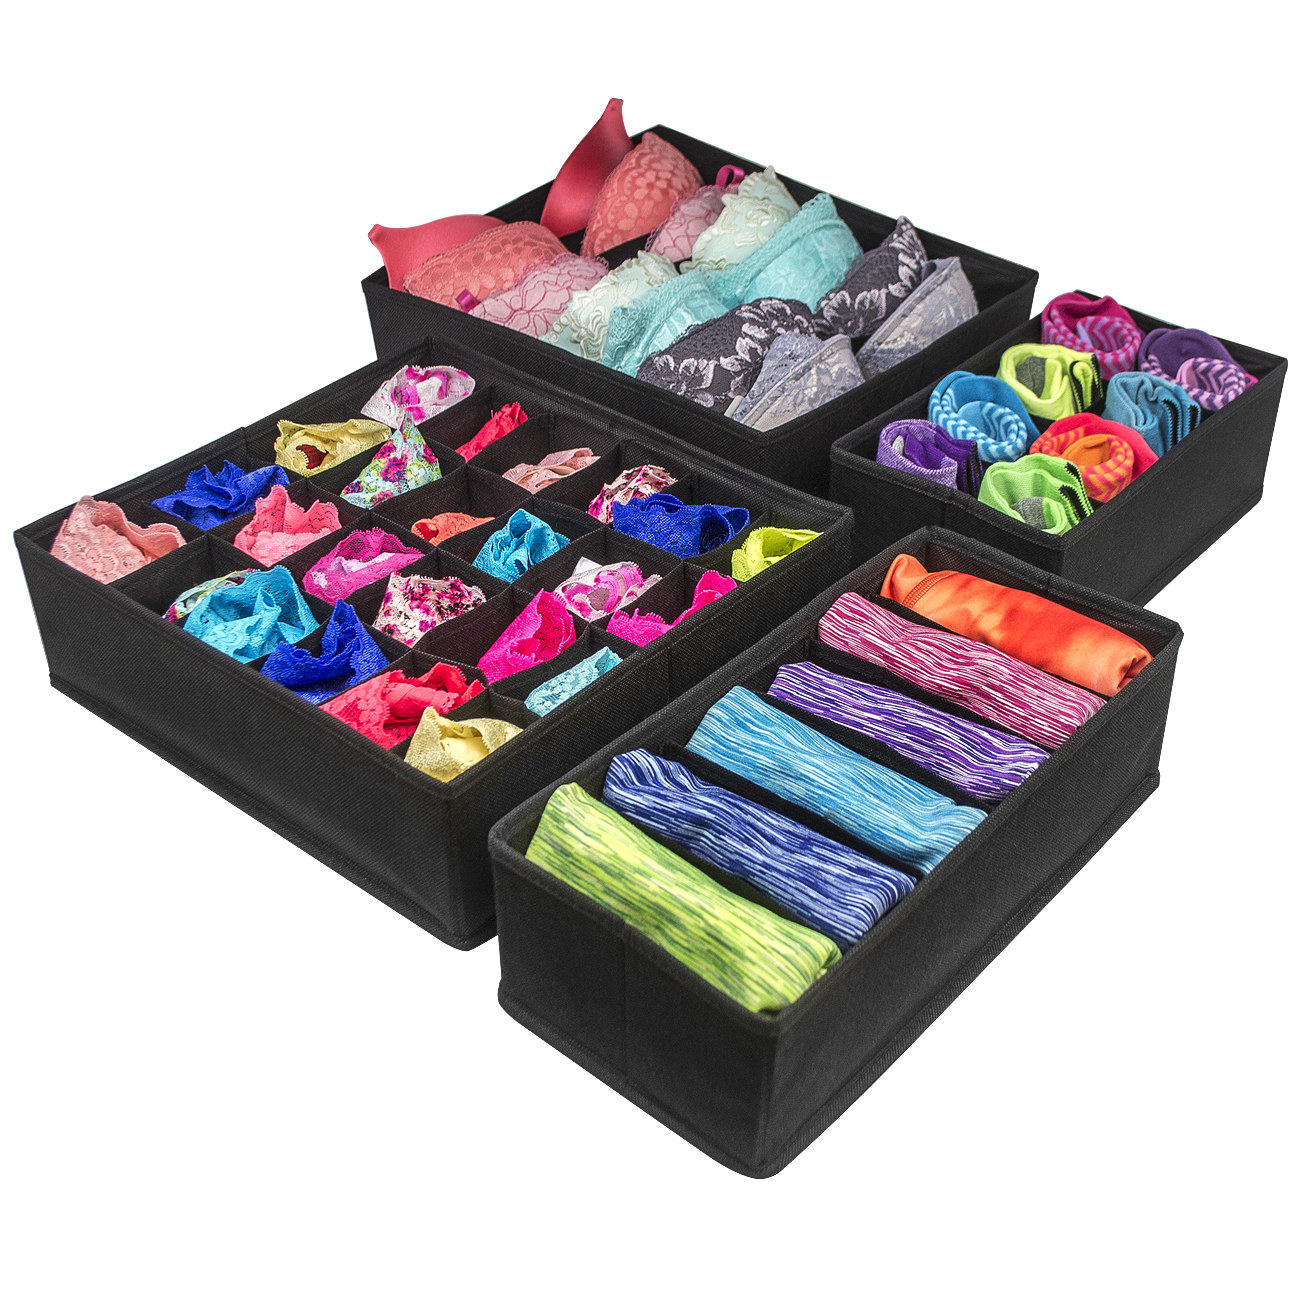 four fabric organizers filled with underwear, bras, and small accessories